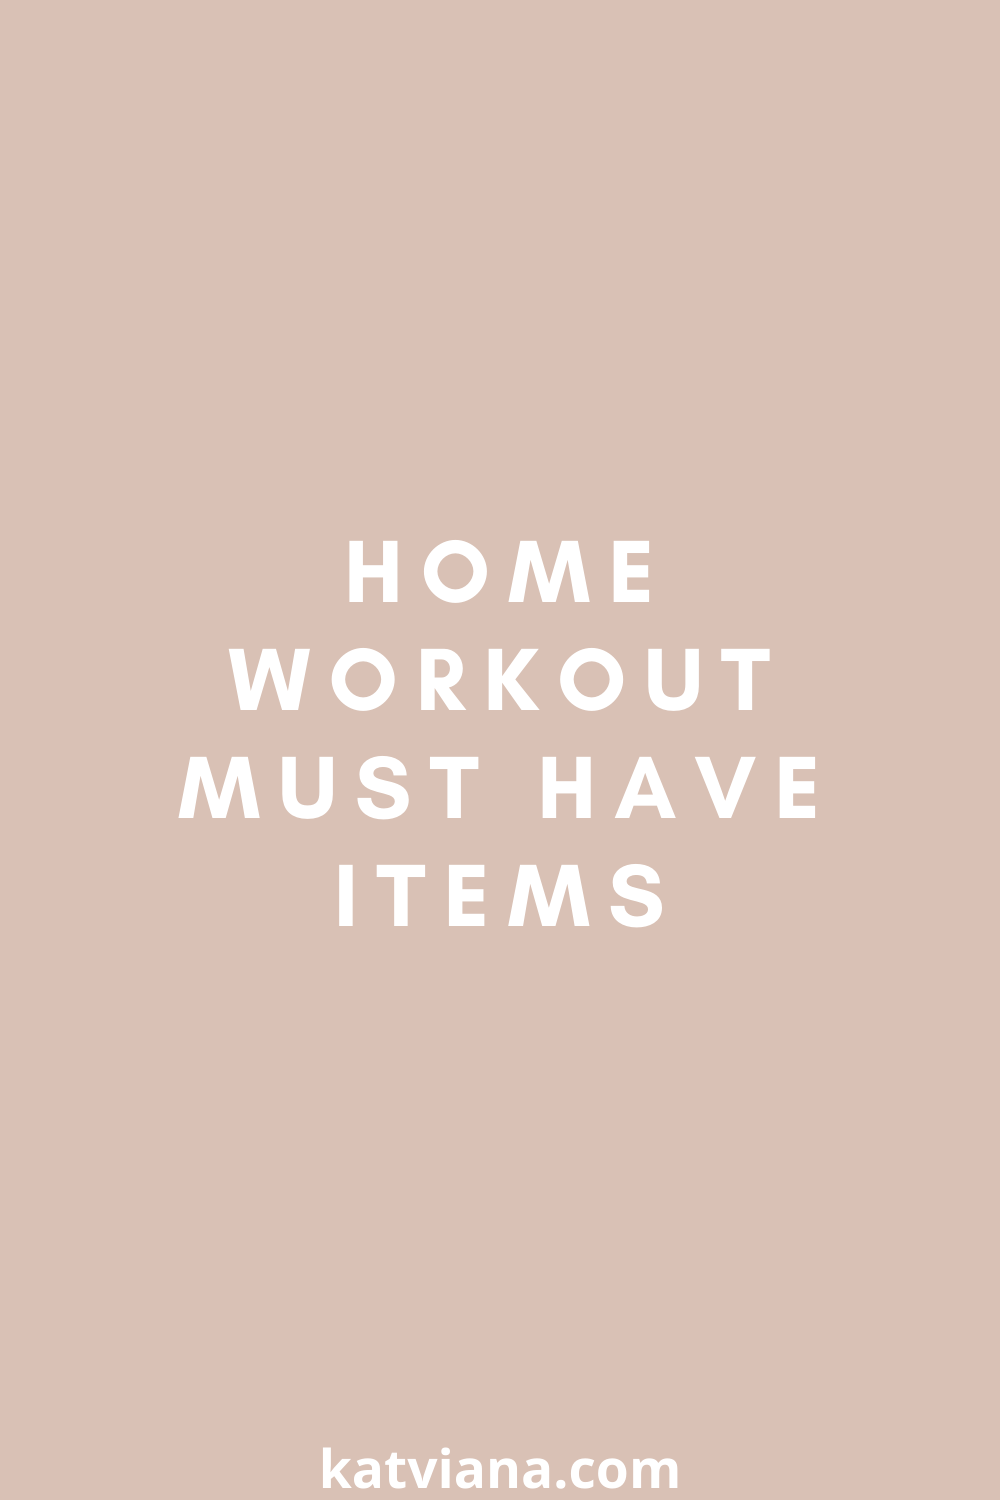 Home Workout Must Have Items | Kat Viana